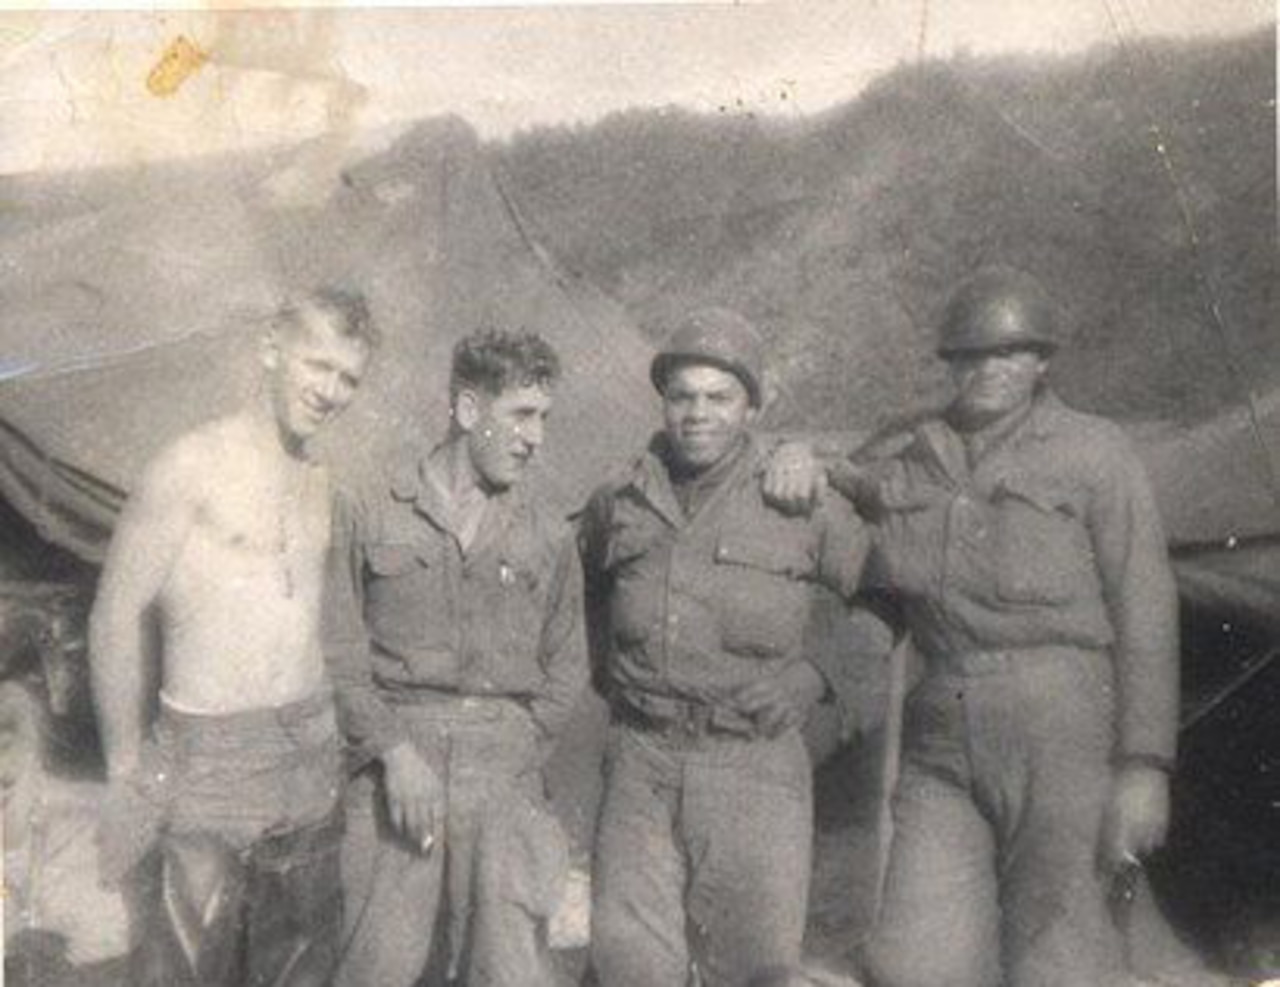 Four soldiers pose for a photo; mountains and tents are in the background.